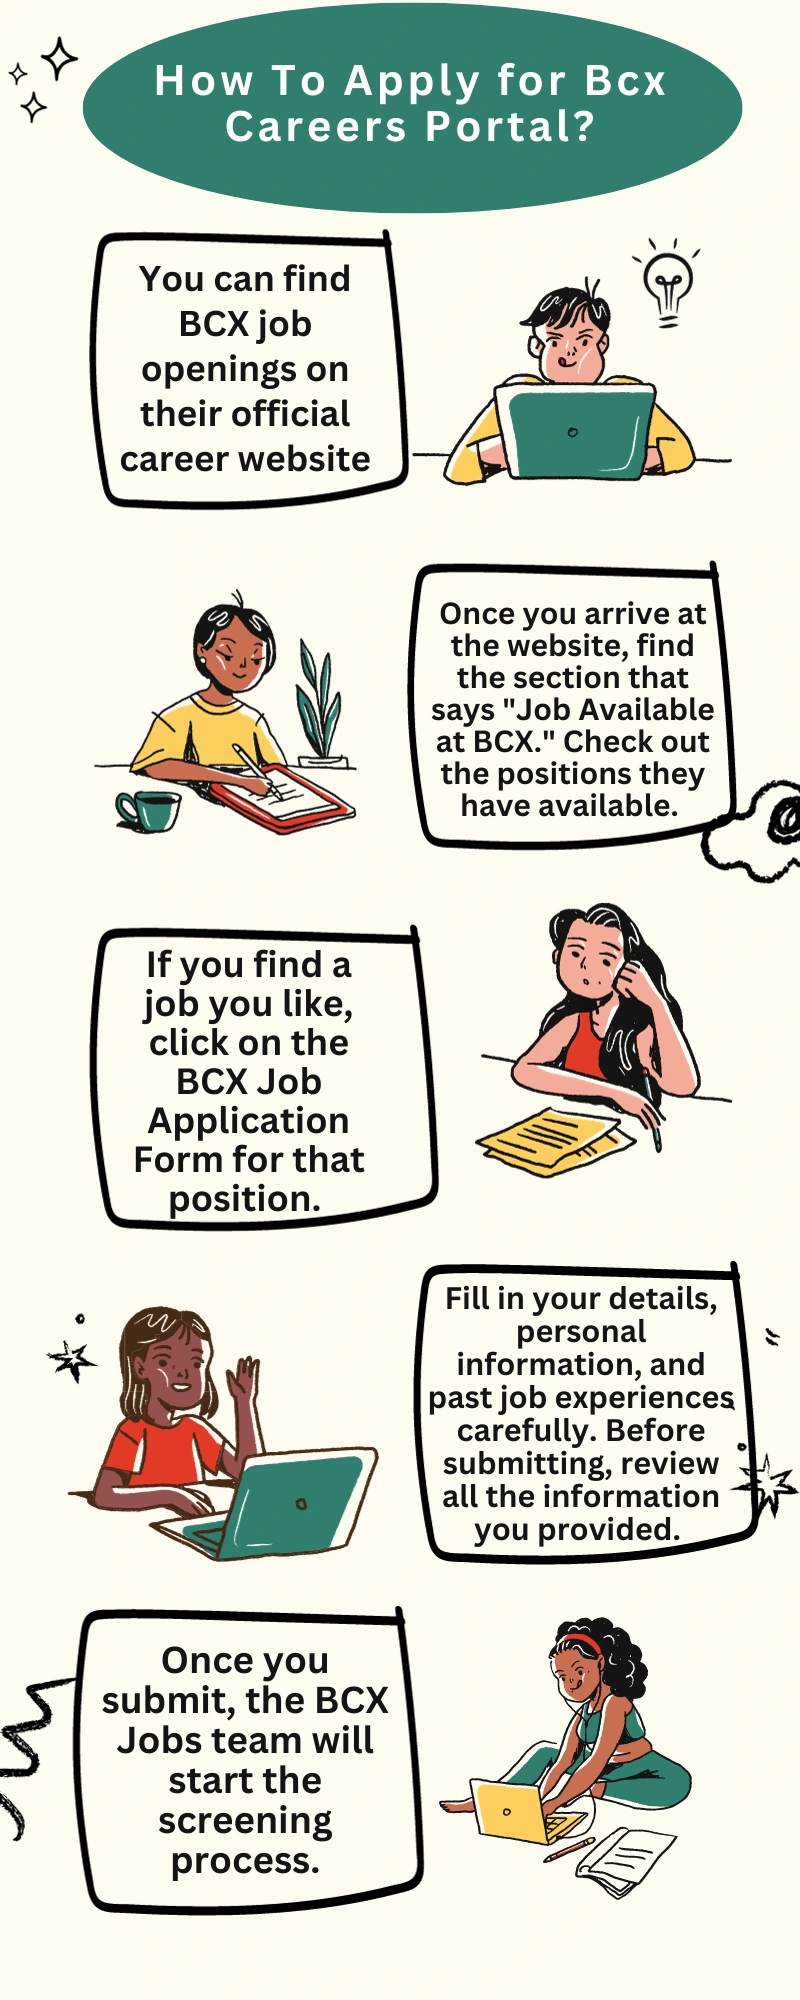 How To Apply for Bcx Careers Portal?